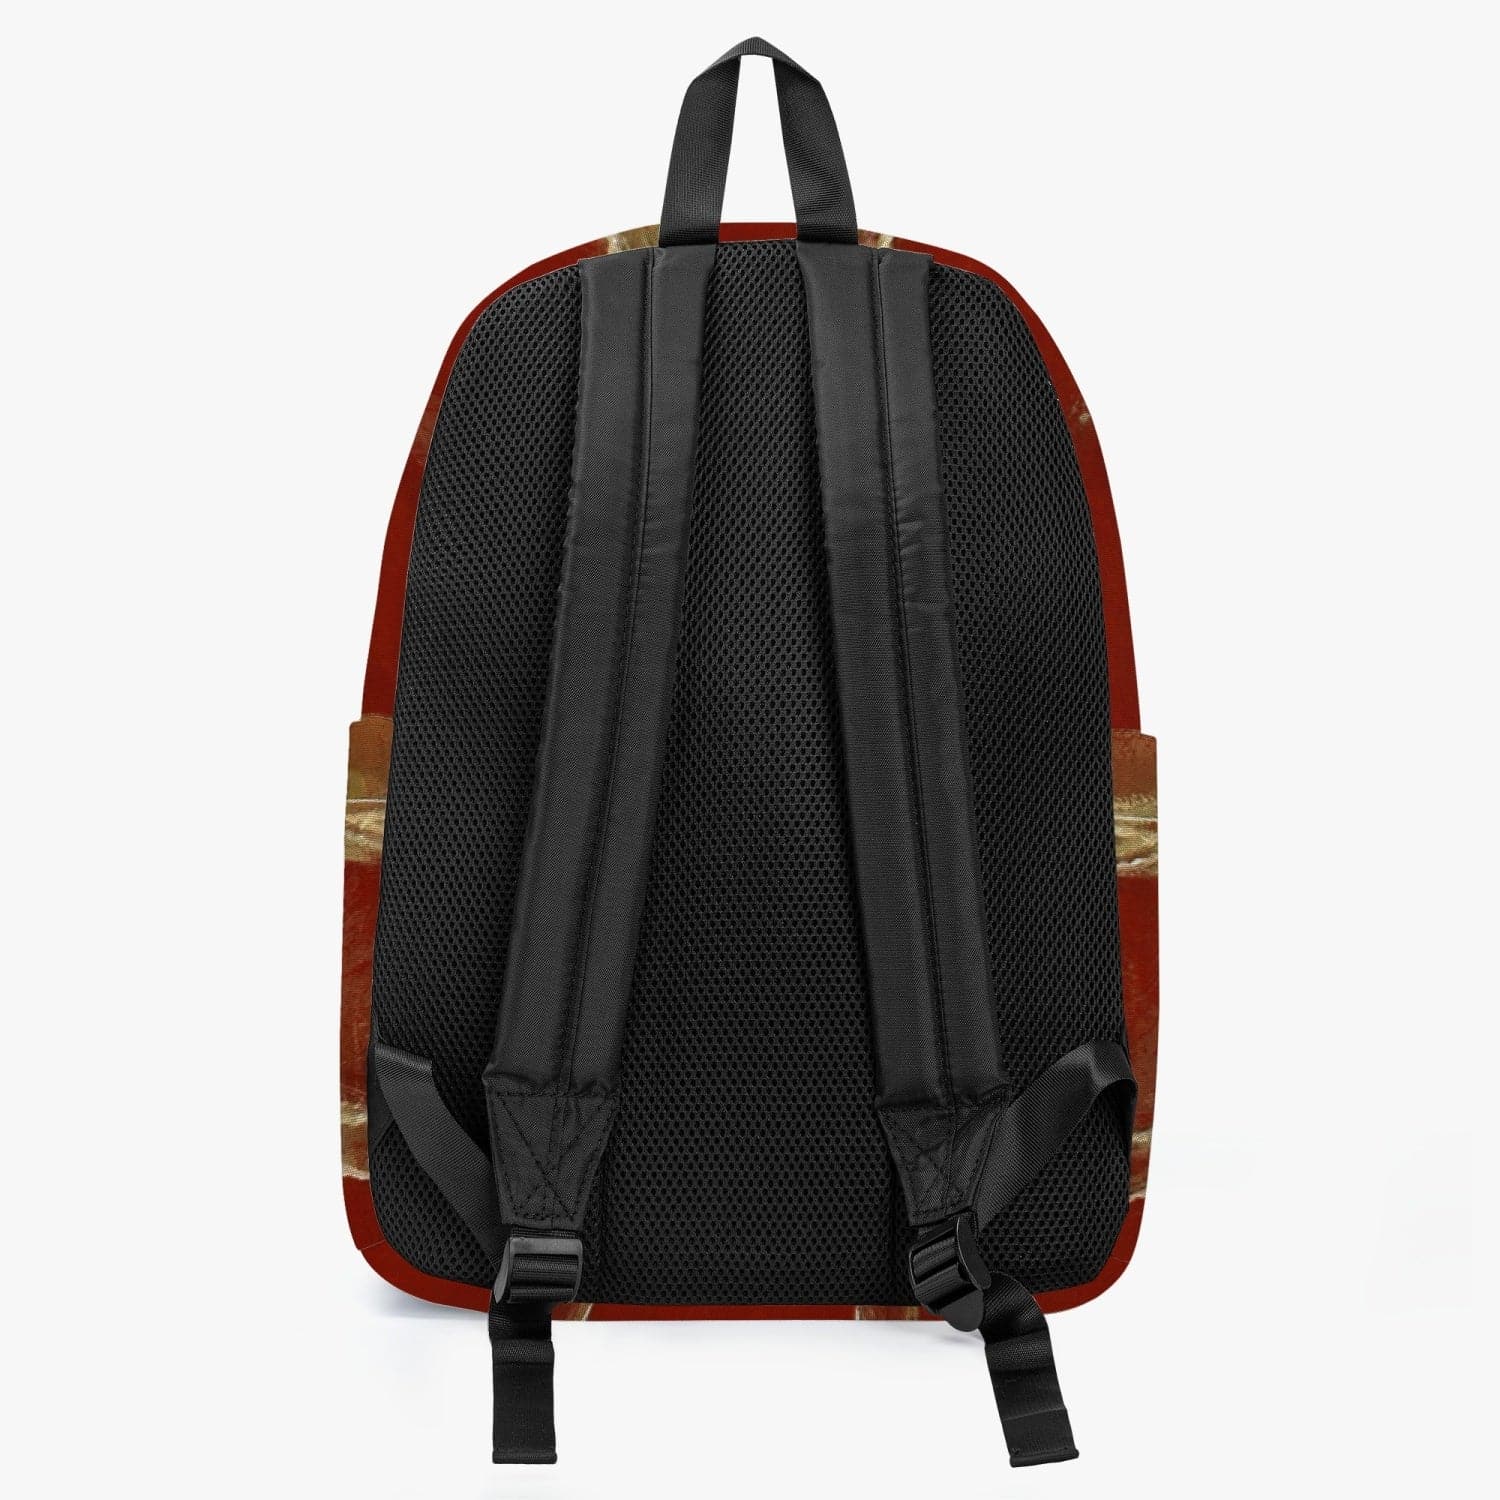 'Royalty' Canvas Backpack designed by Sensus Studio